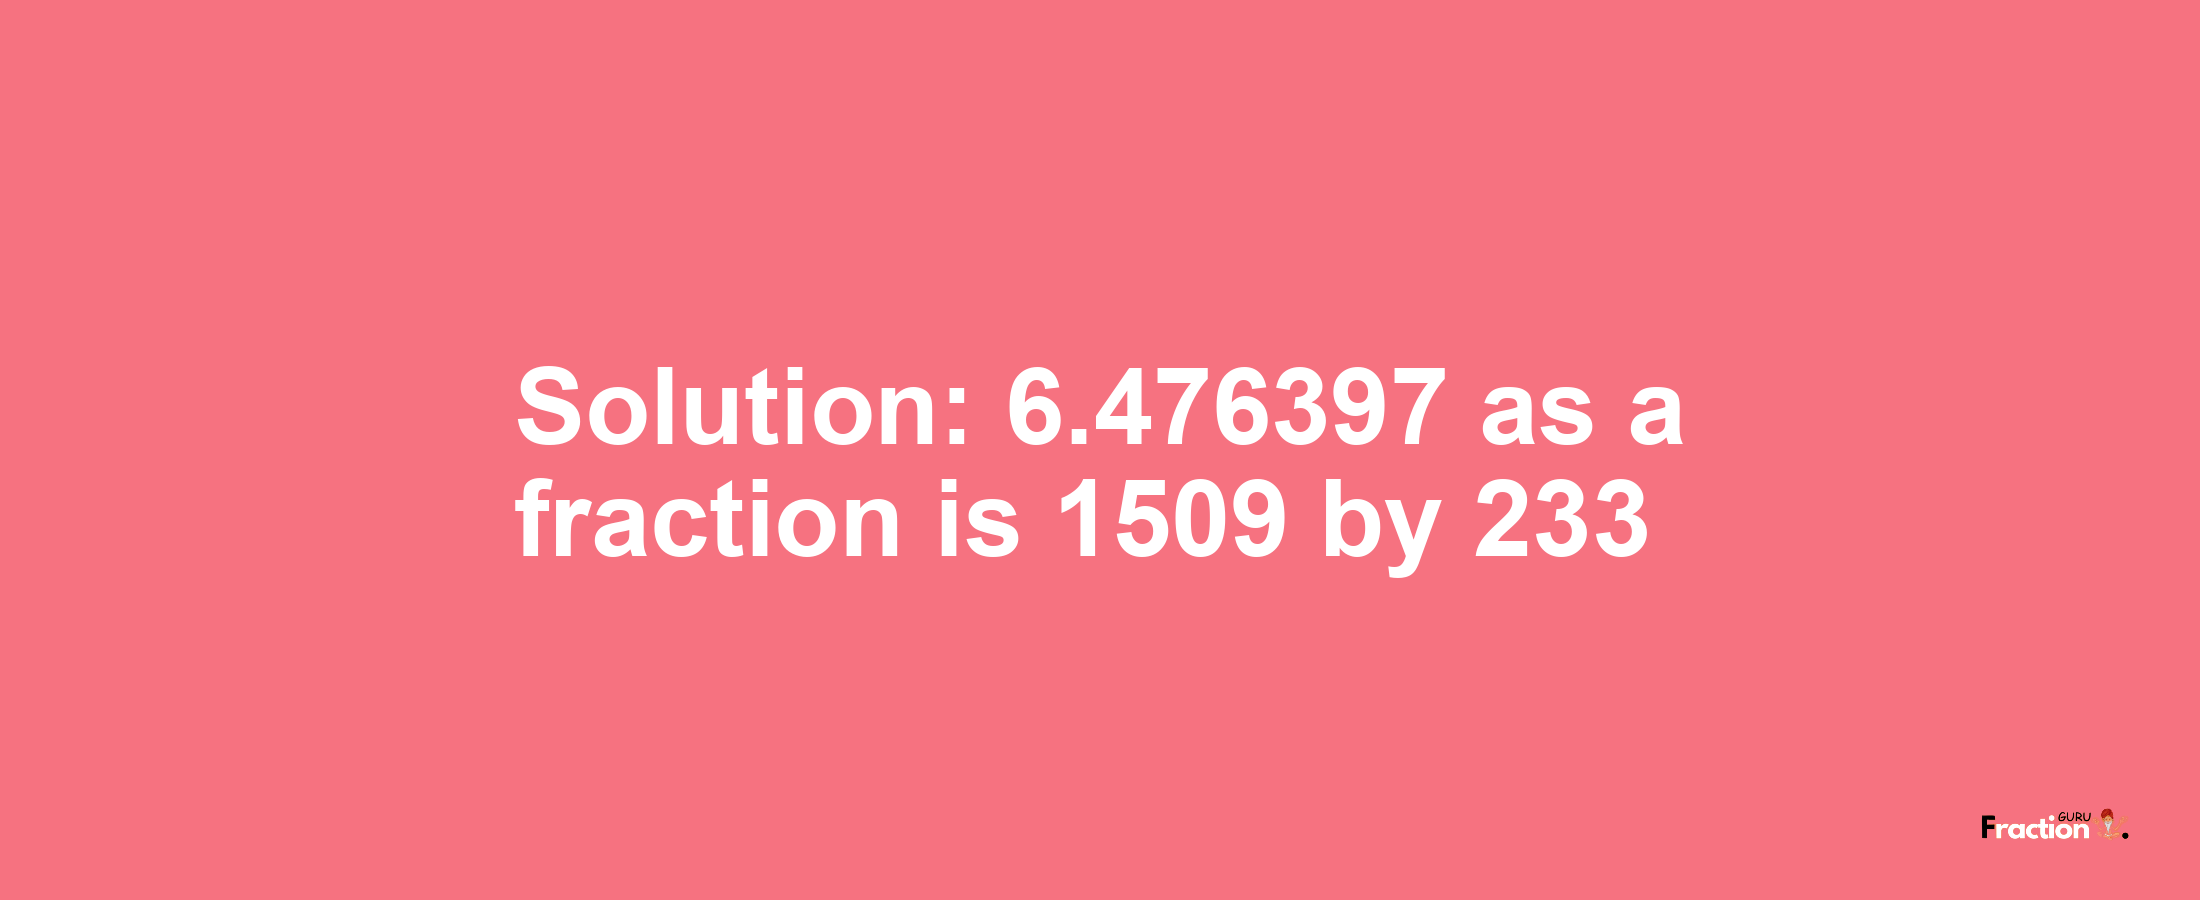 Solution:6.476397 as a fraction is 1509/233